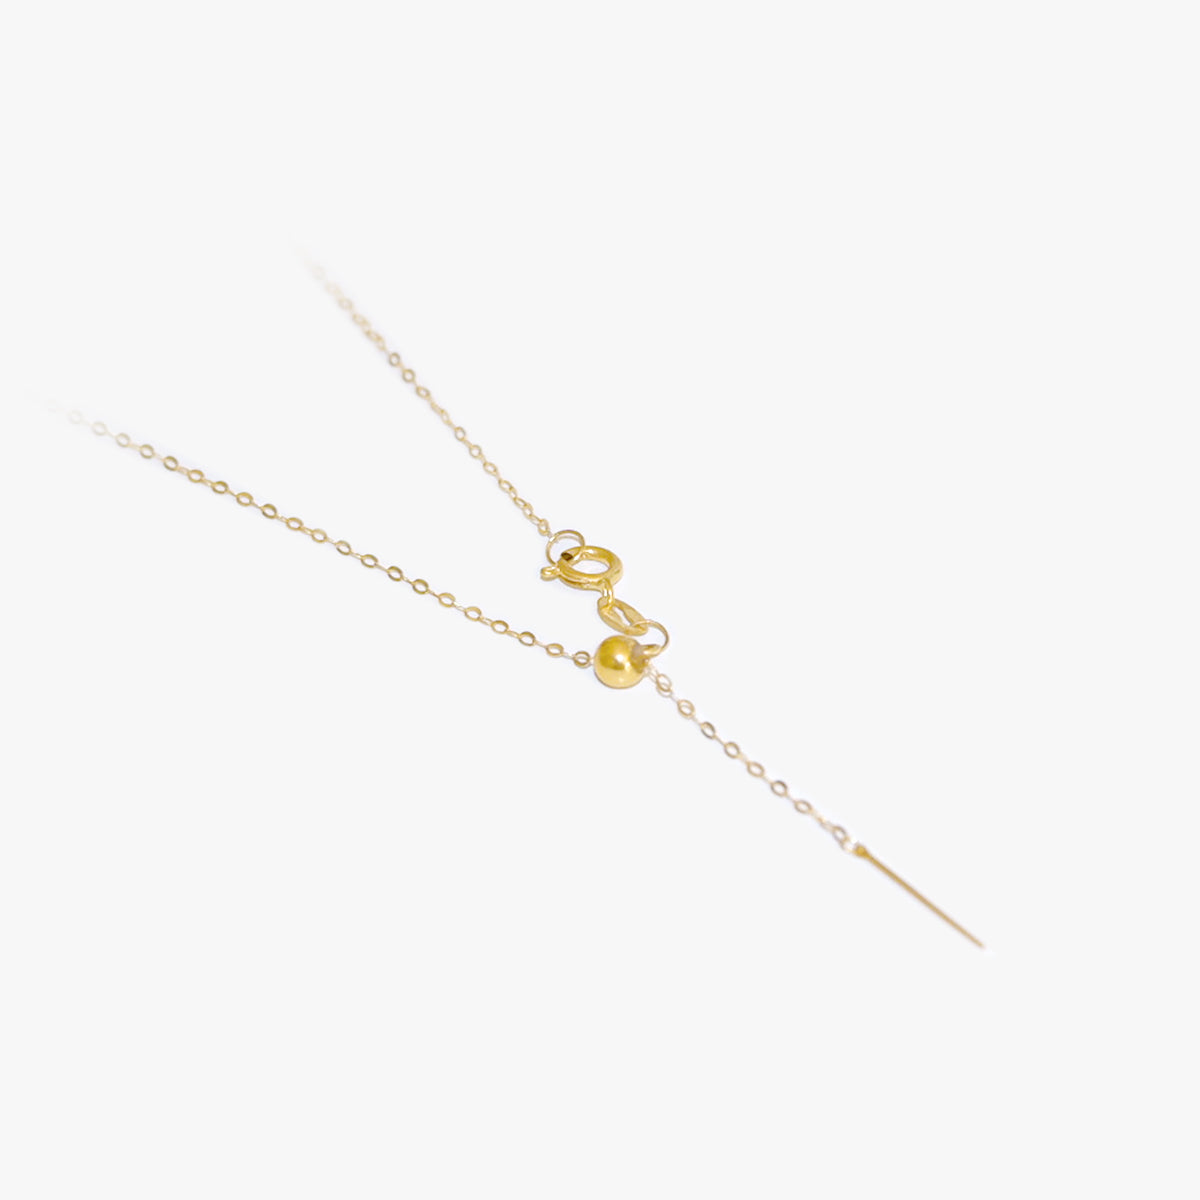 The Barely There Ultra Thin Slider Necklace in Solid Gold